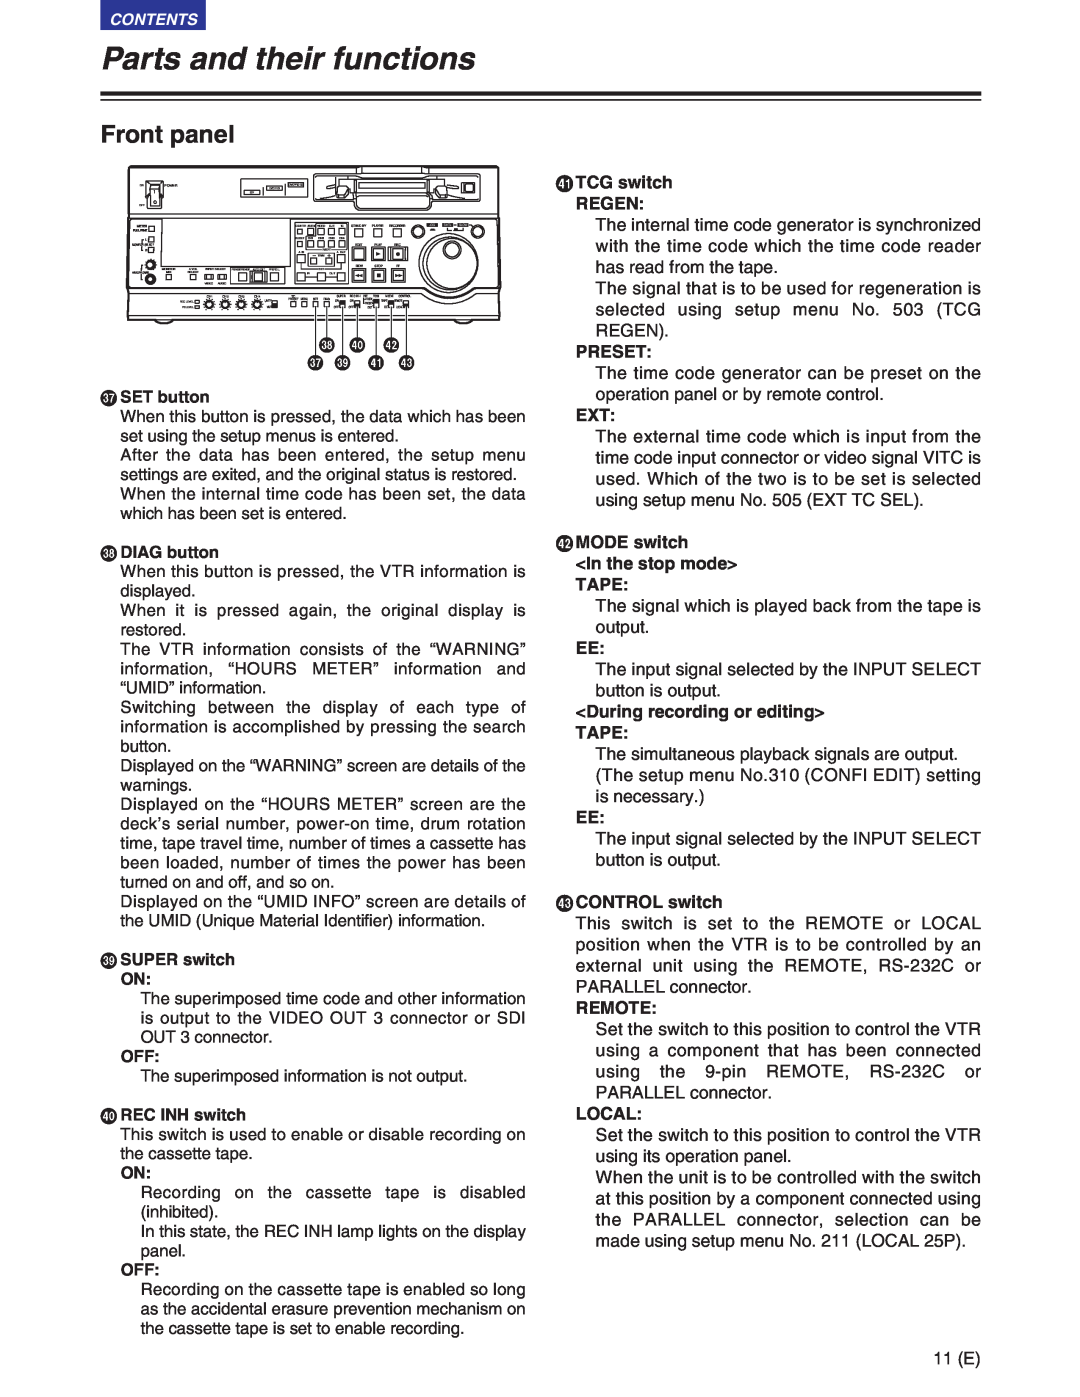 Panasonic AJ-SD955BE, AJ-SD930BE manual Parts and their functions, Front panel, YTCG switch 